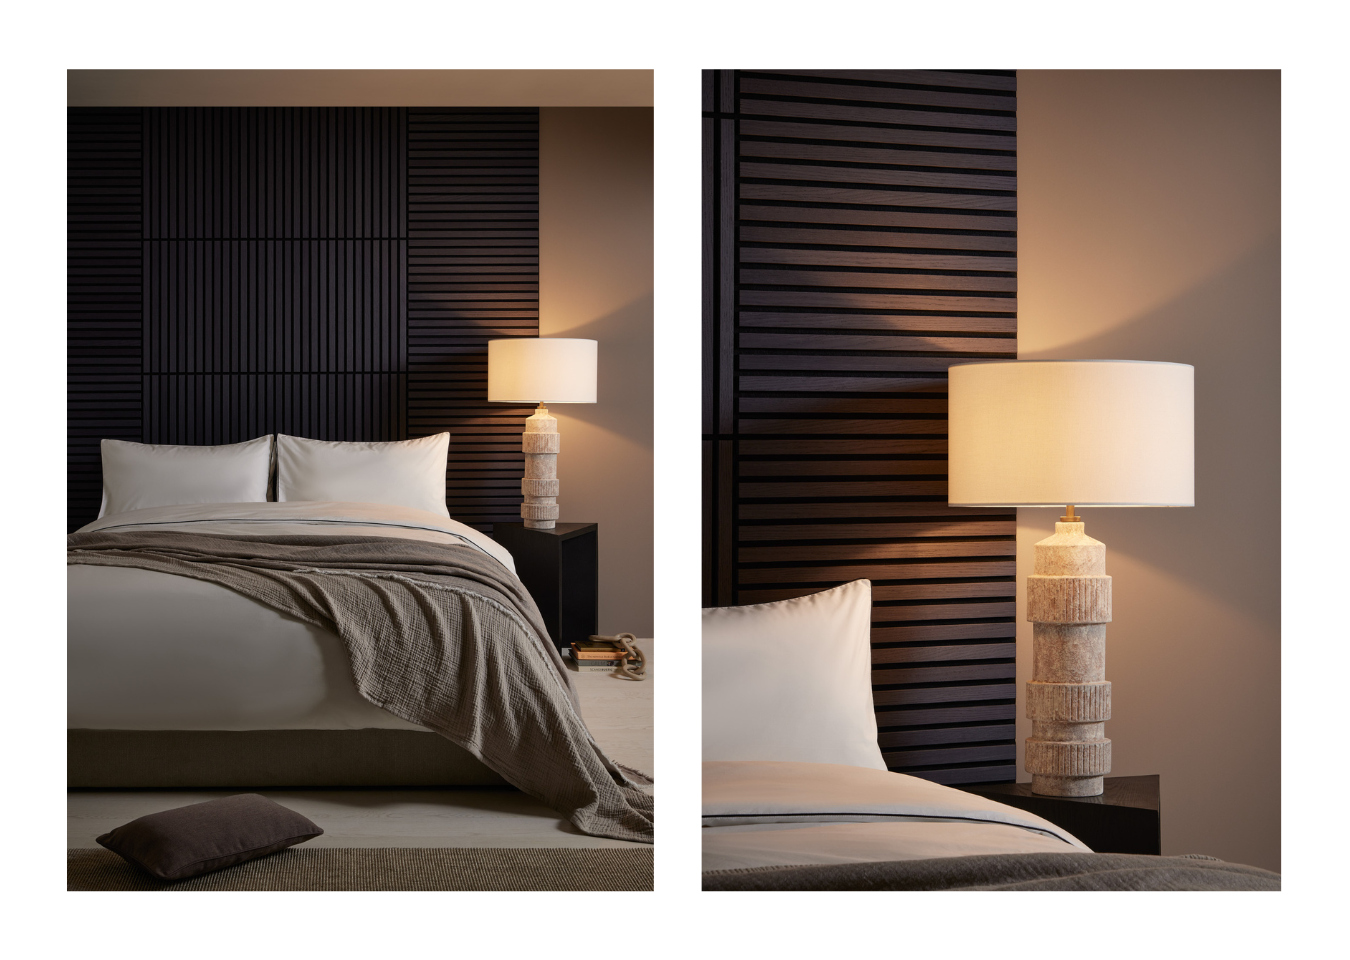 Left: a floor-to-ceiling bed headboard made from SlatWall Mini Charcoal Black panels. Right: a lamp in front of the headboard.